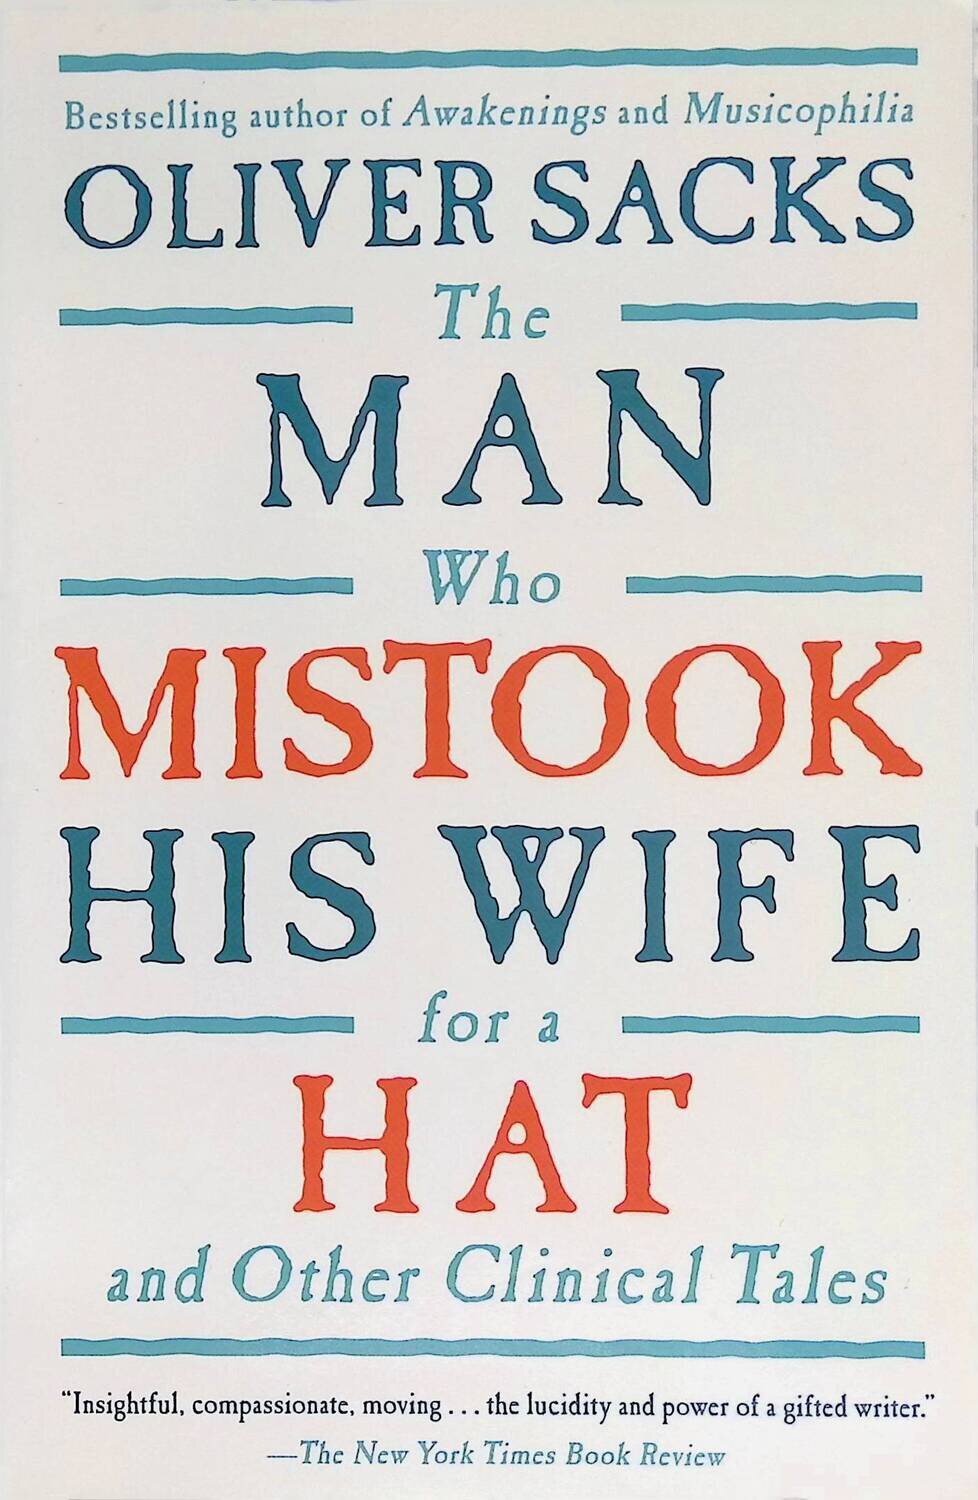 The Man Who Mistook His Wife for a Hat; Oliver Sacks